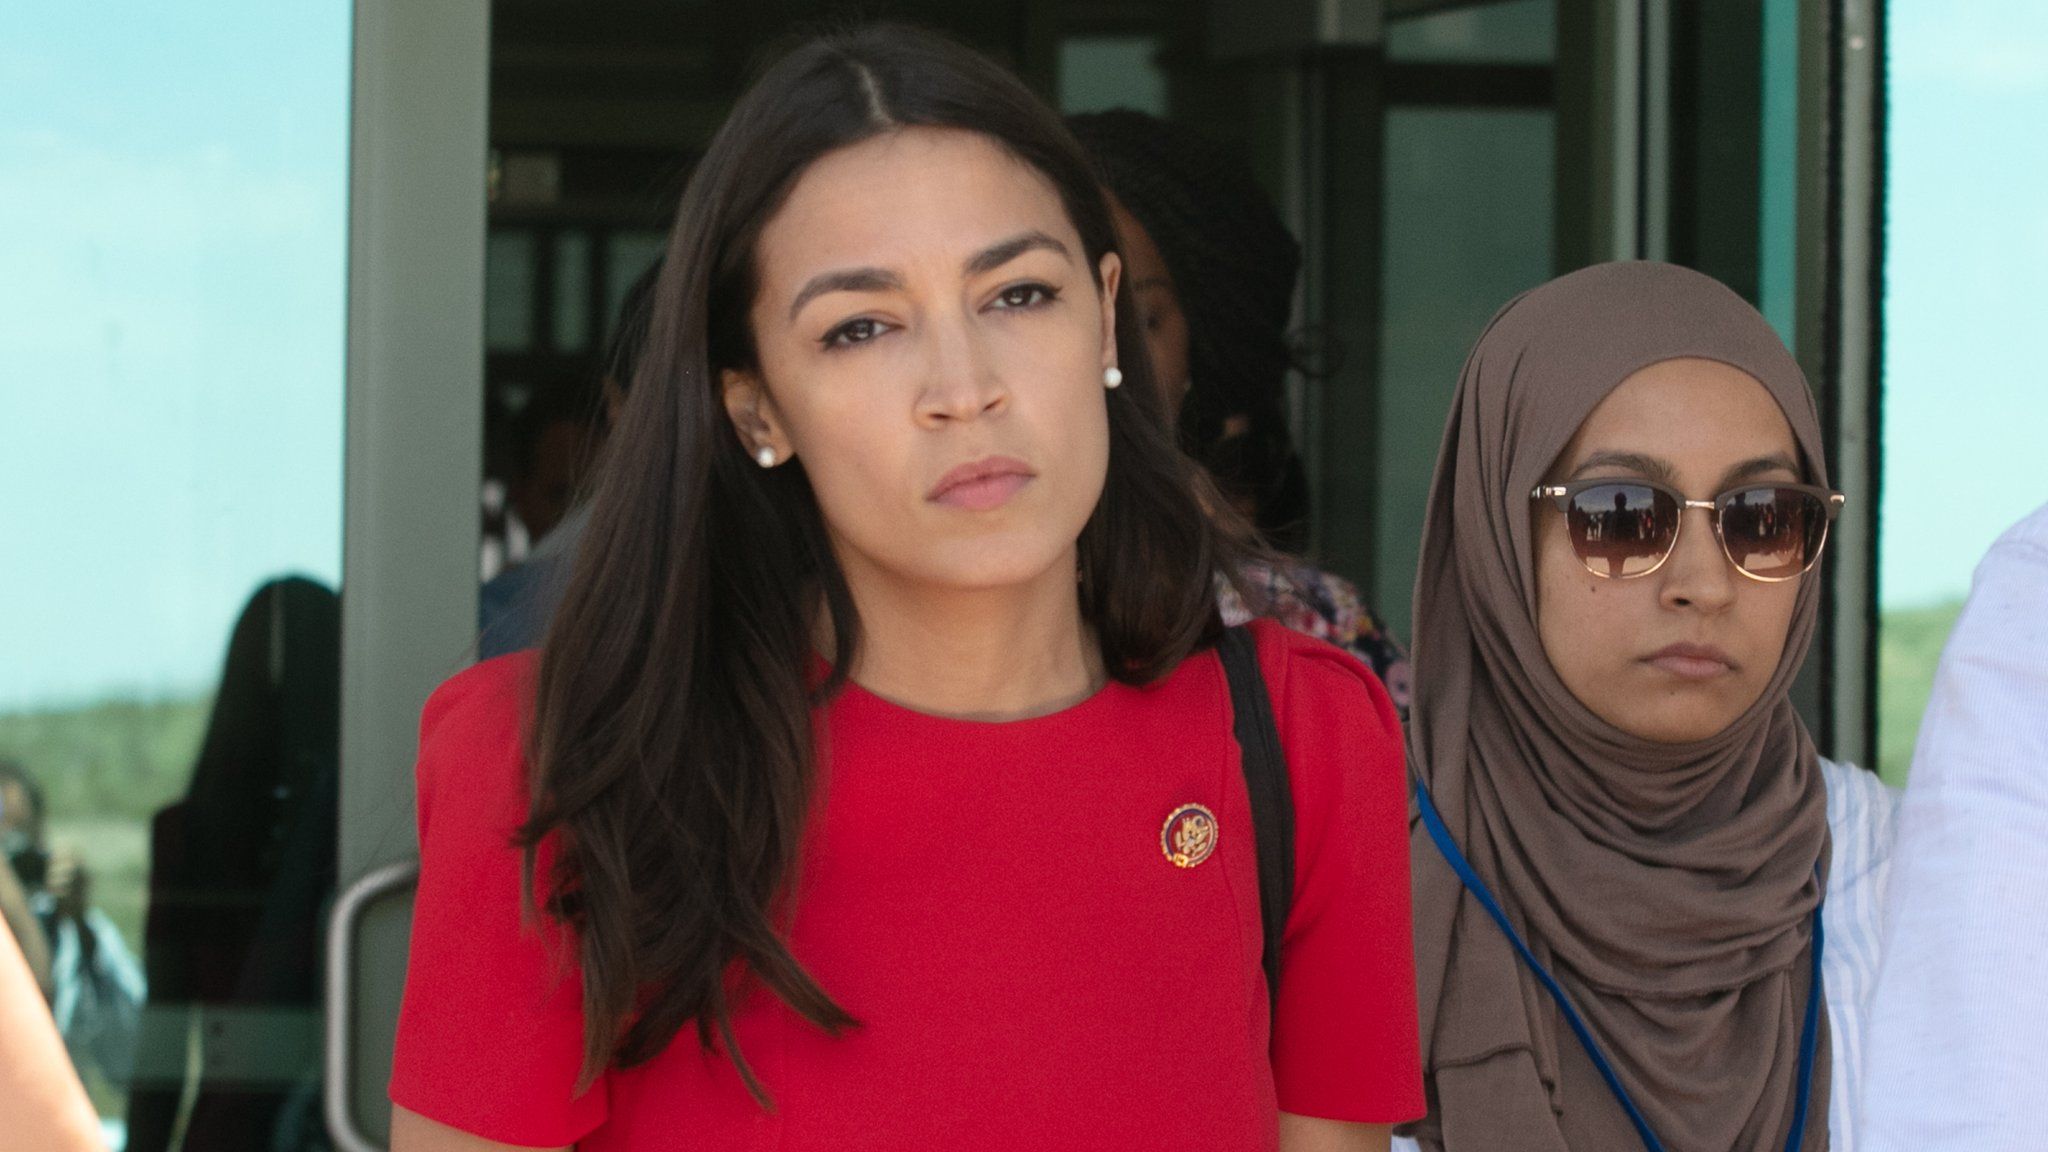 Rep. Alexandria Ocasio-Cortez walking out from the El Paso Border Patrol Station in Clint, Texas, on 1 July 2019